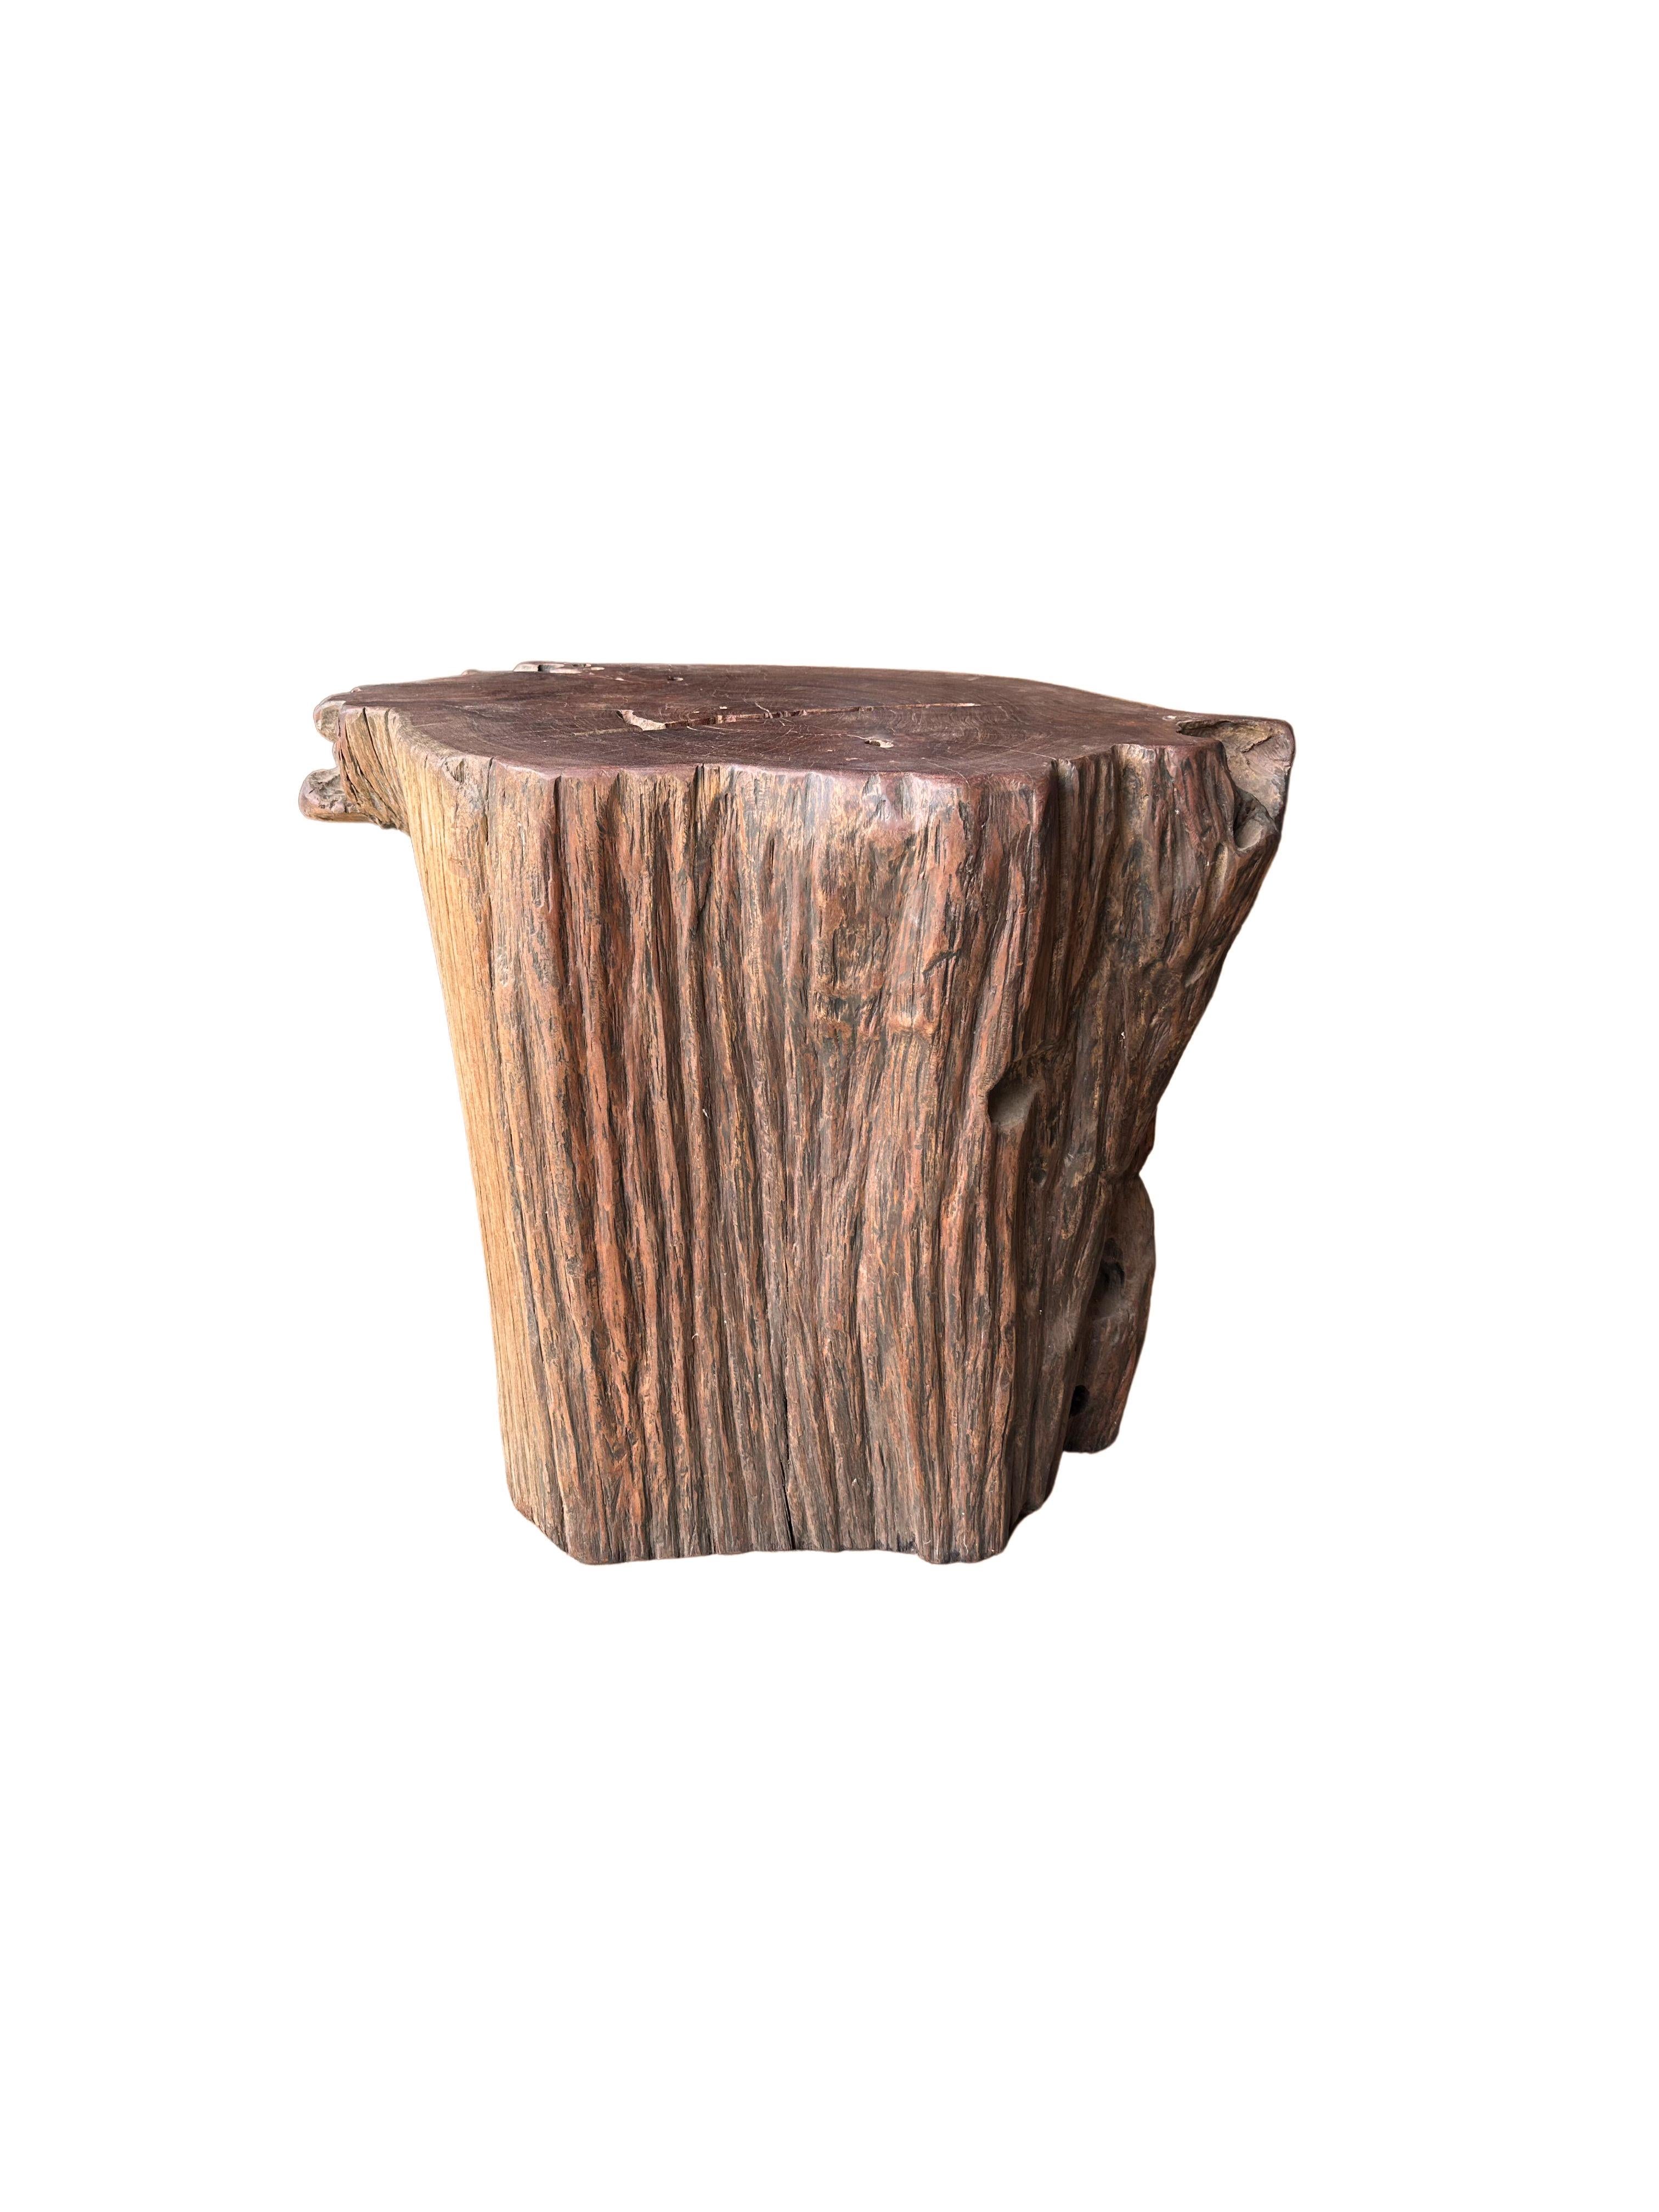 Other Large Raw Organic Solid Iron Wood Side Table 